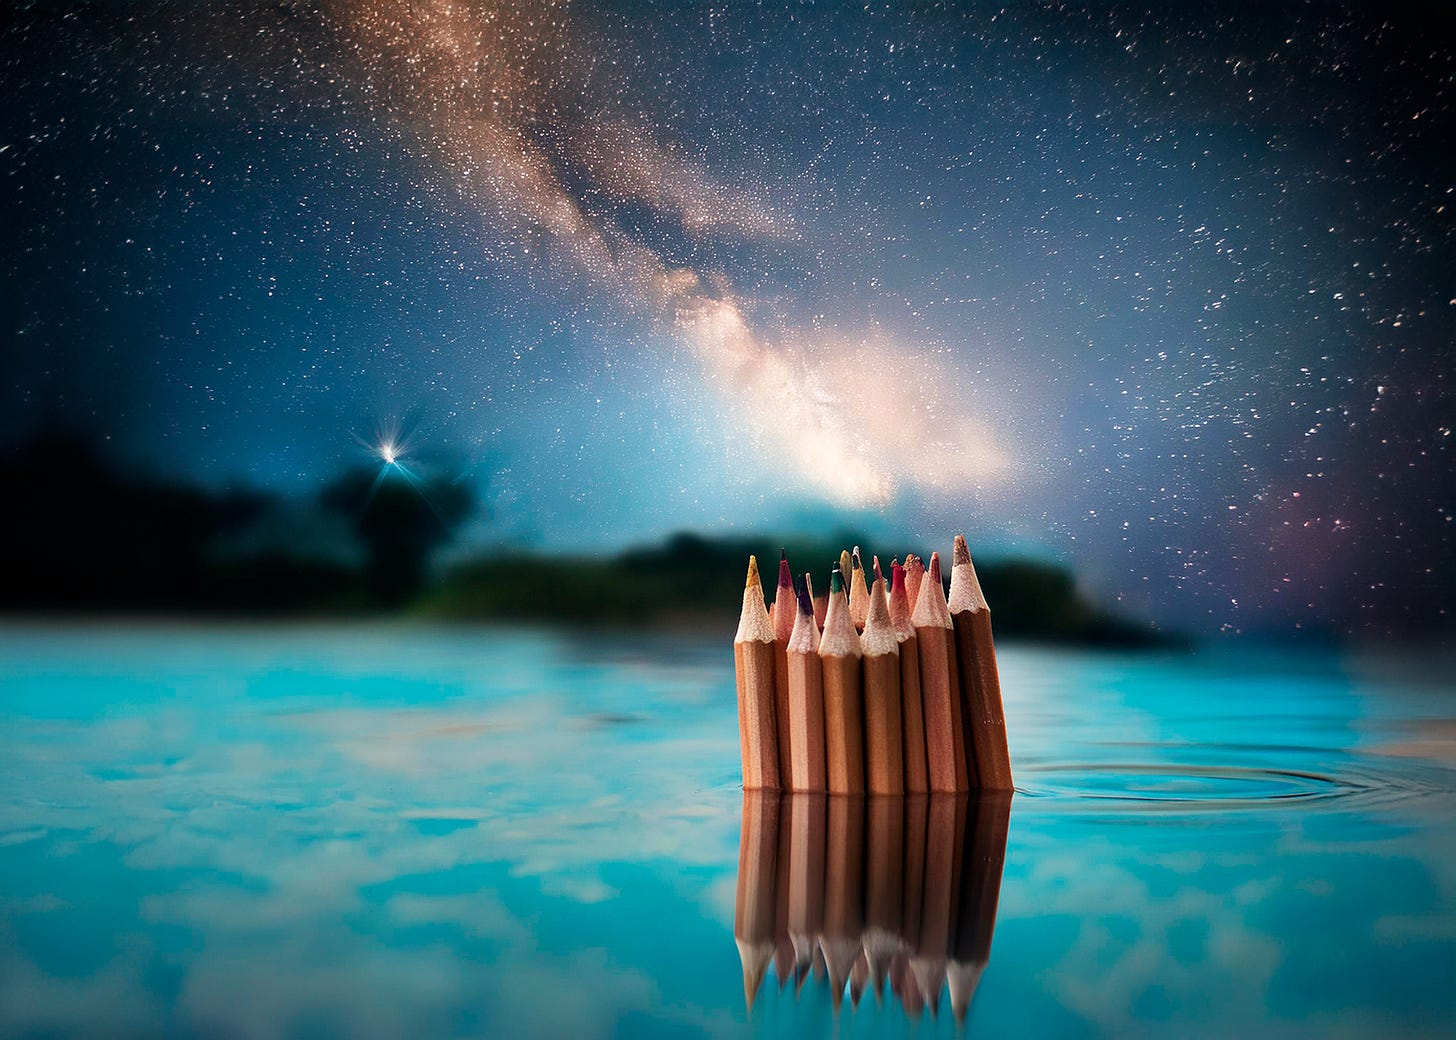 surreal view of artist's pencils in turquoise water with celestial night sky above